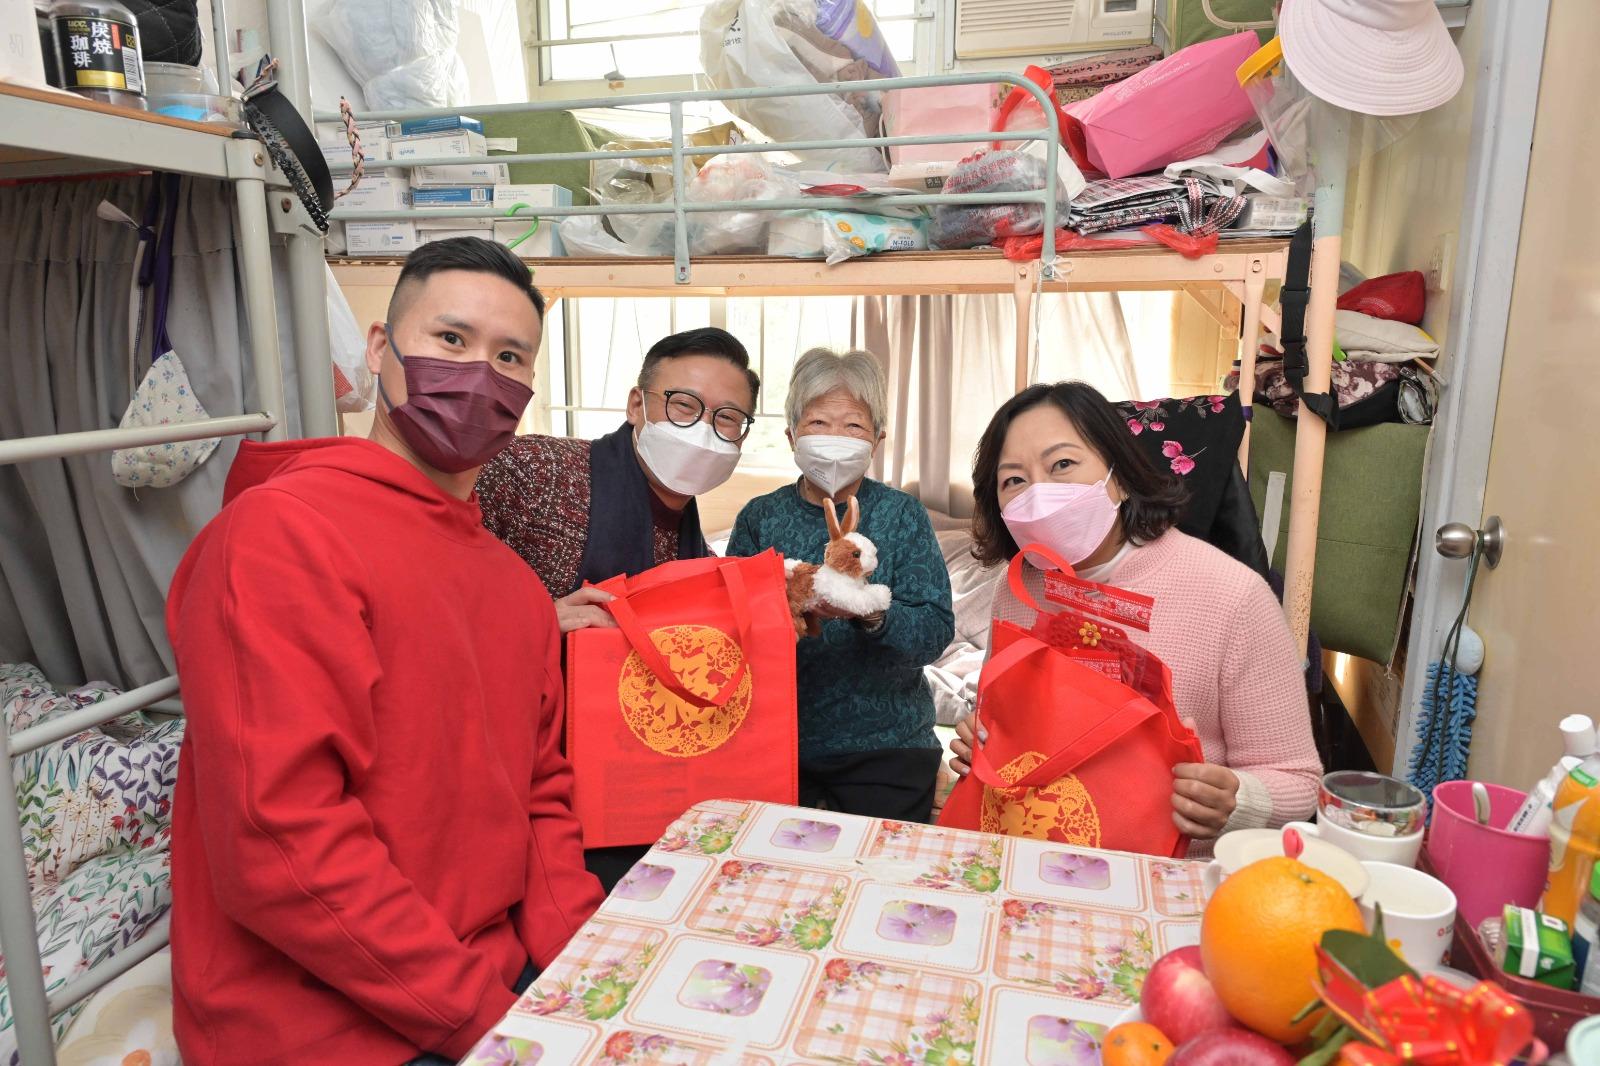 The Deputy Secretary for Justice, Mr Cheung Kwok-kwan, together with a number of the Principal Officials today (January 23) visited grass-roots families in Wong Tai Sin District to distribute blessing bags and celebrate Chinese New Year with them. Photo shows Mr Cheung (second left), together with the Secretary for Home and Youth Affairs, Miss Alice Mak (first right), visiting an elderly person to learn about her needs and daily life and give a gift pack to her. Next to them is the District Officer (Wong Tai Sin), Mr Steve Wong (first left).